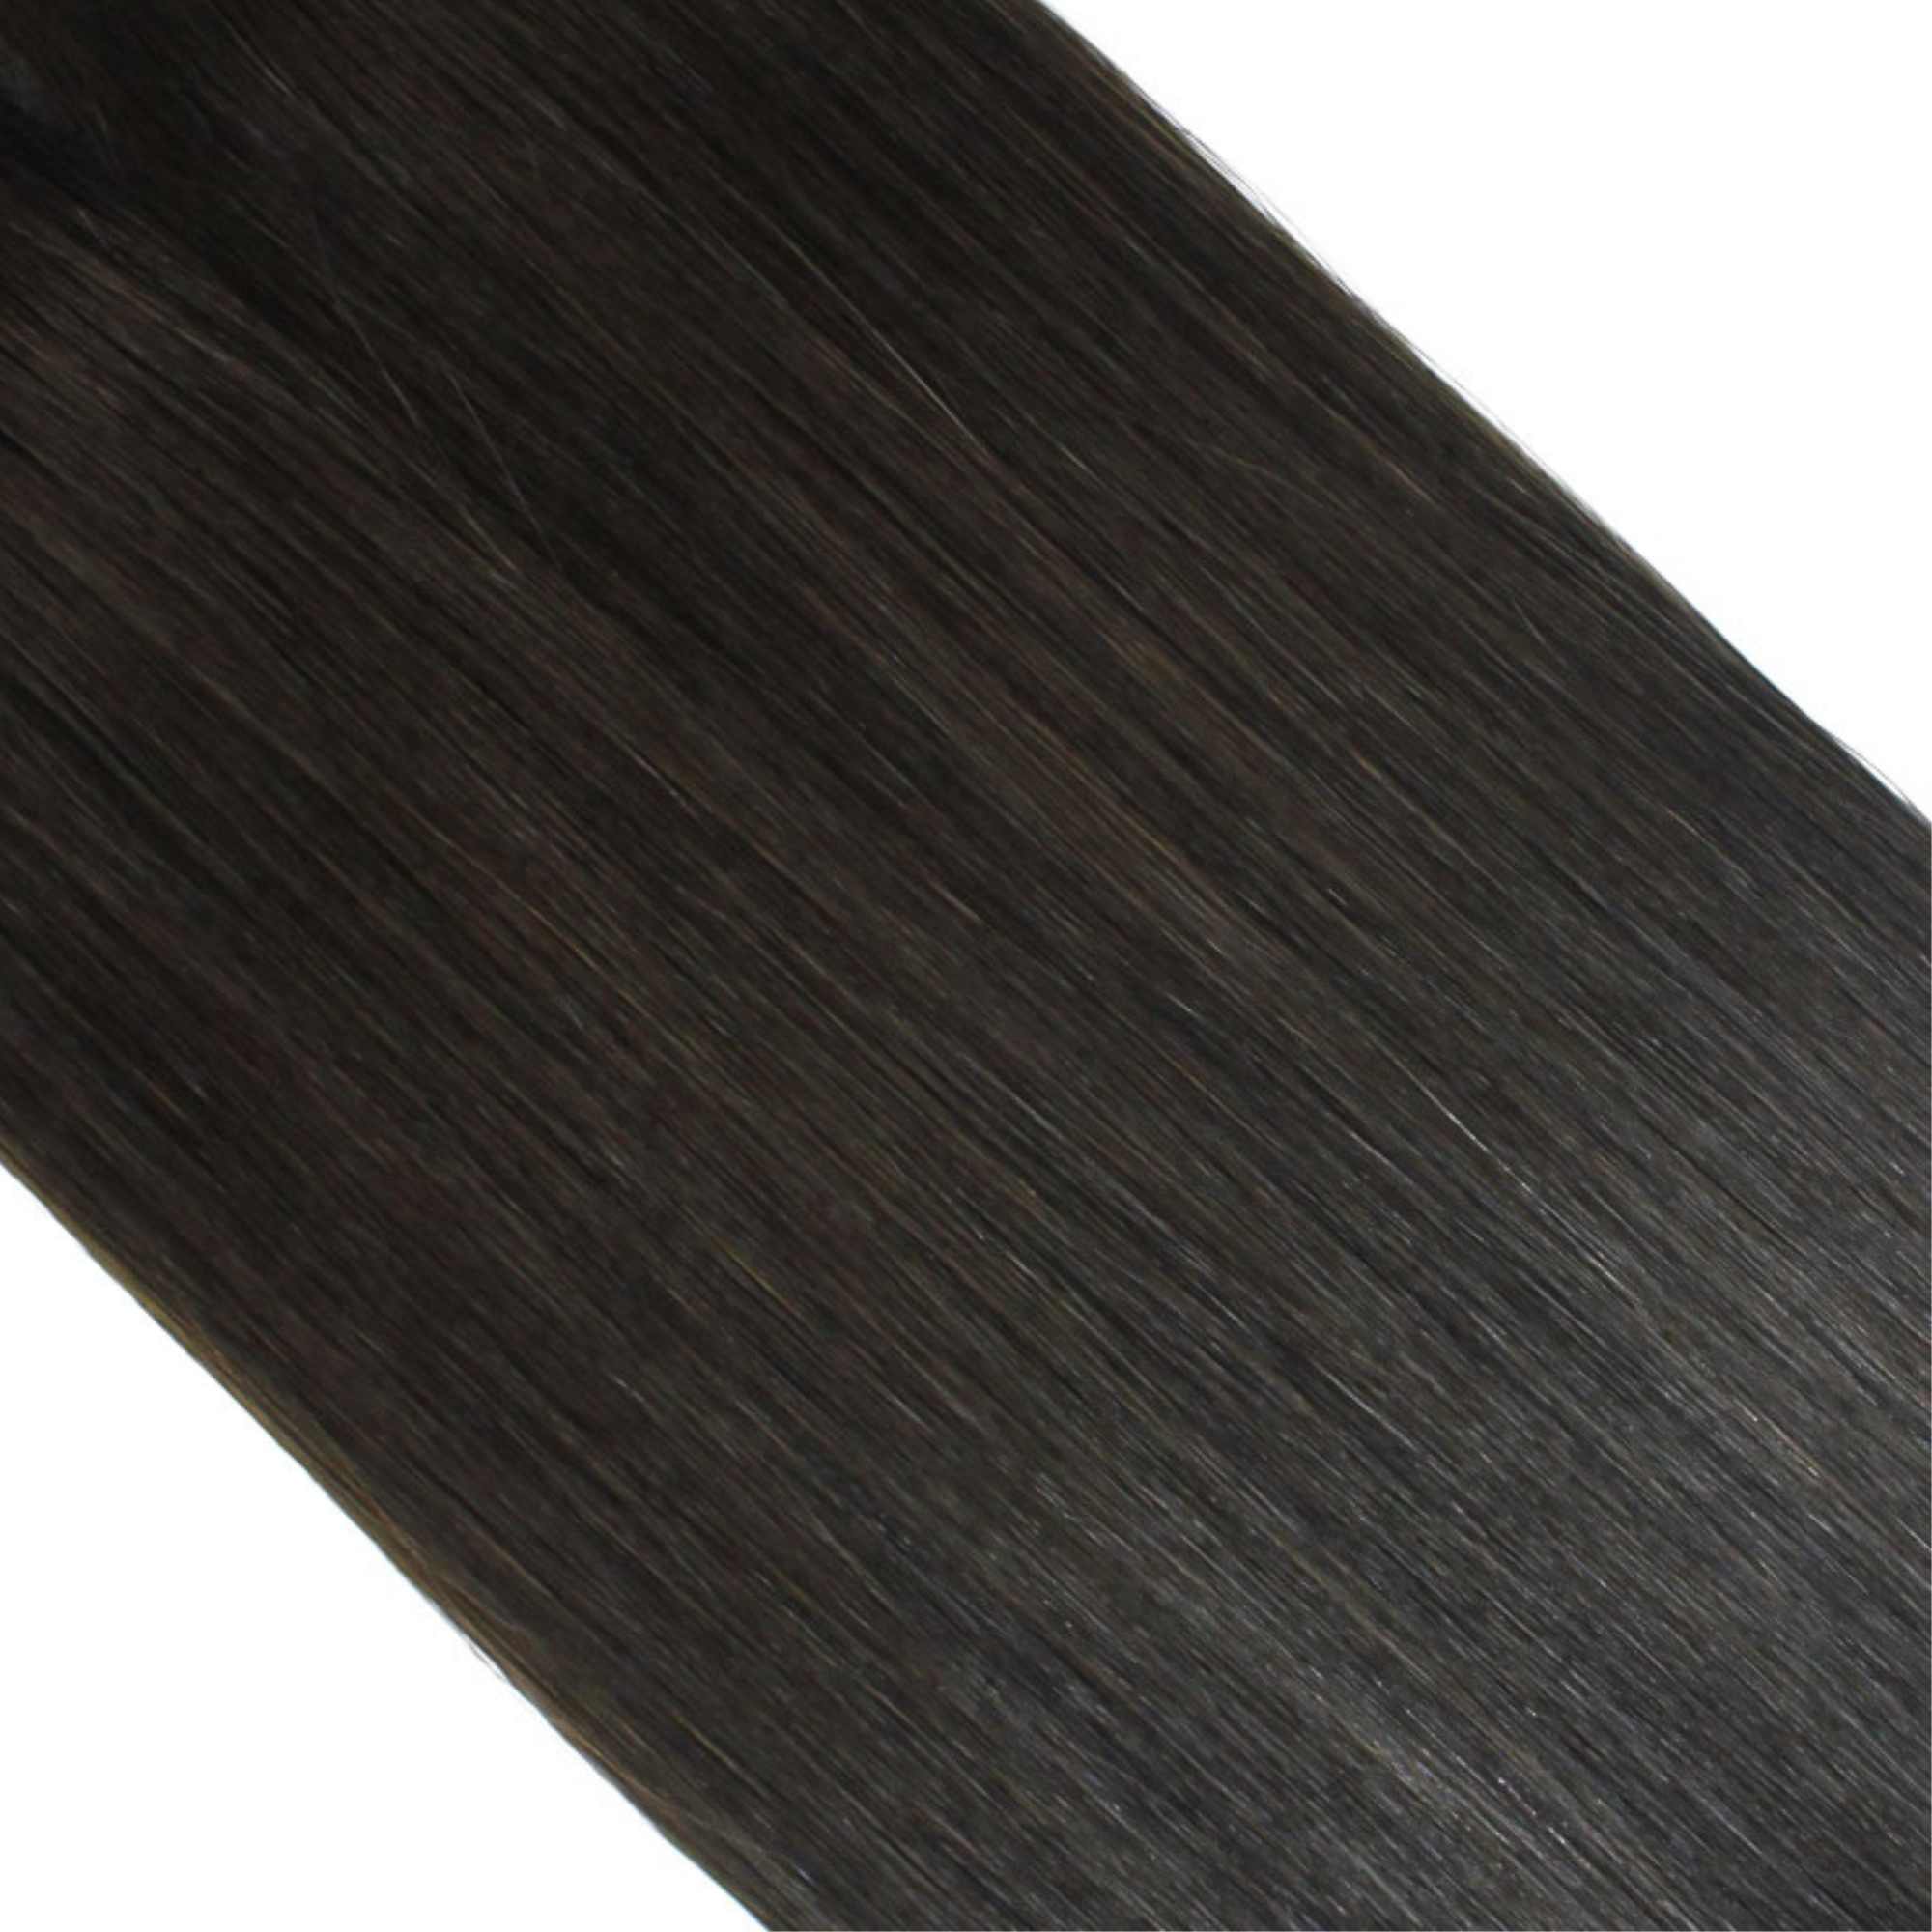 "hair rehab london 20" length 180 grams weight luxe clip-in hair extensions shade titled show stopper"